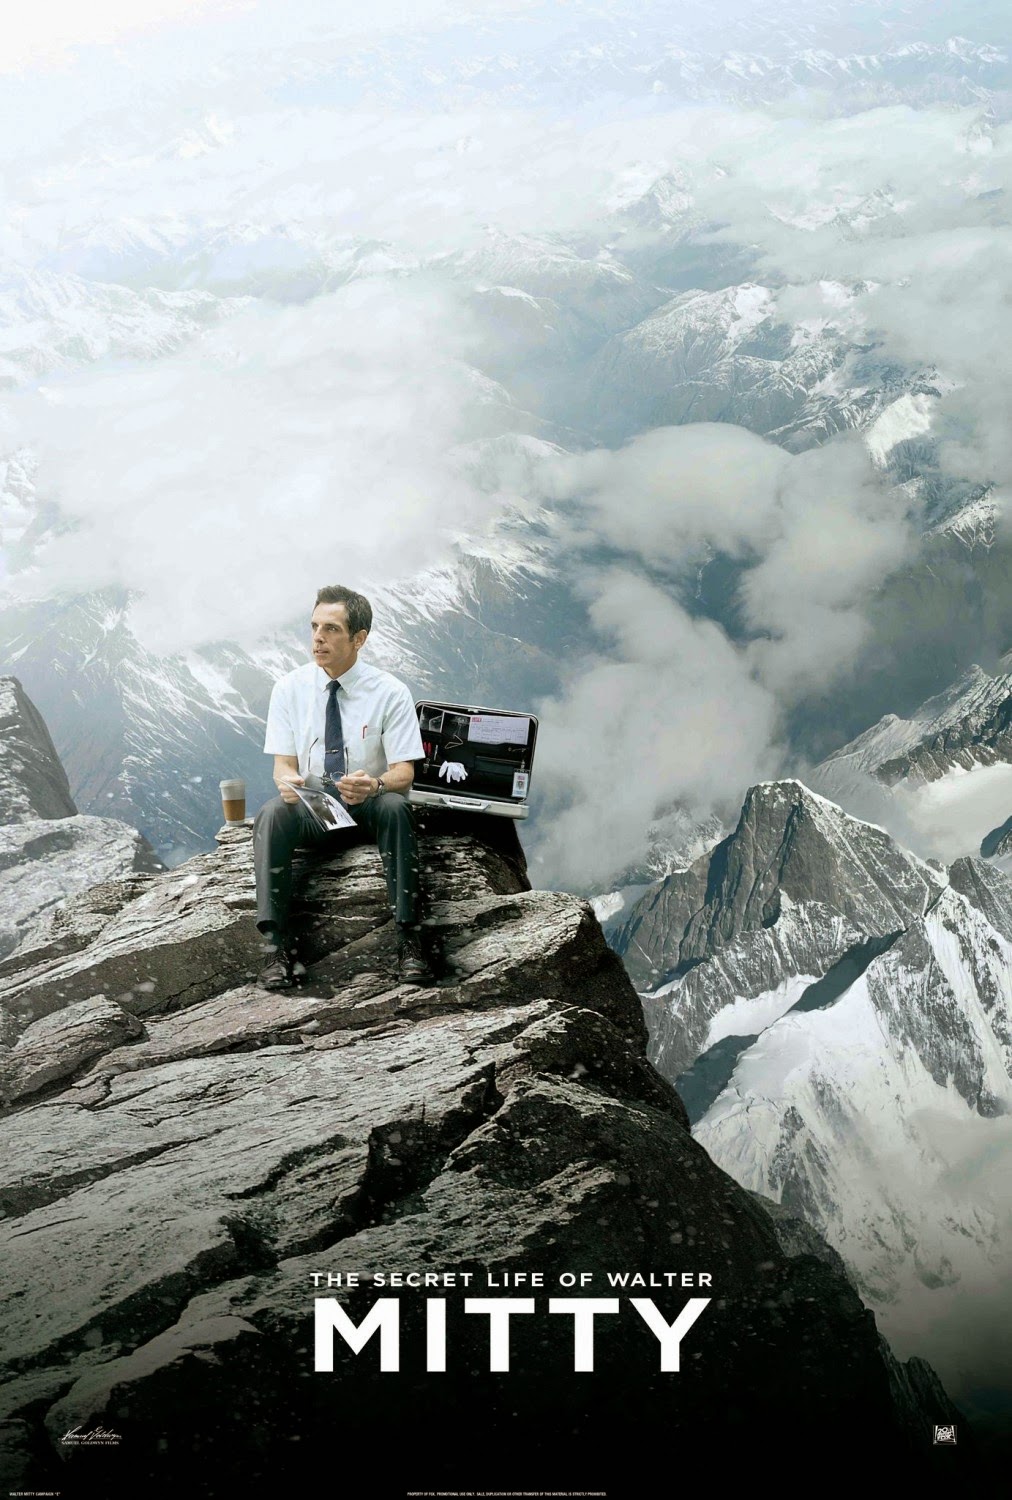 Download The Secret Life of Walter Mitty (2013) BluRay 720p